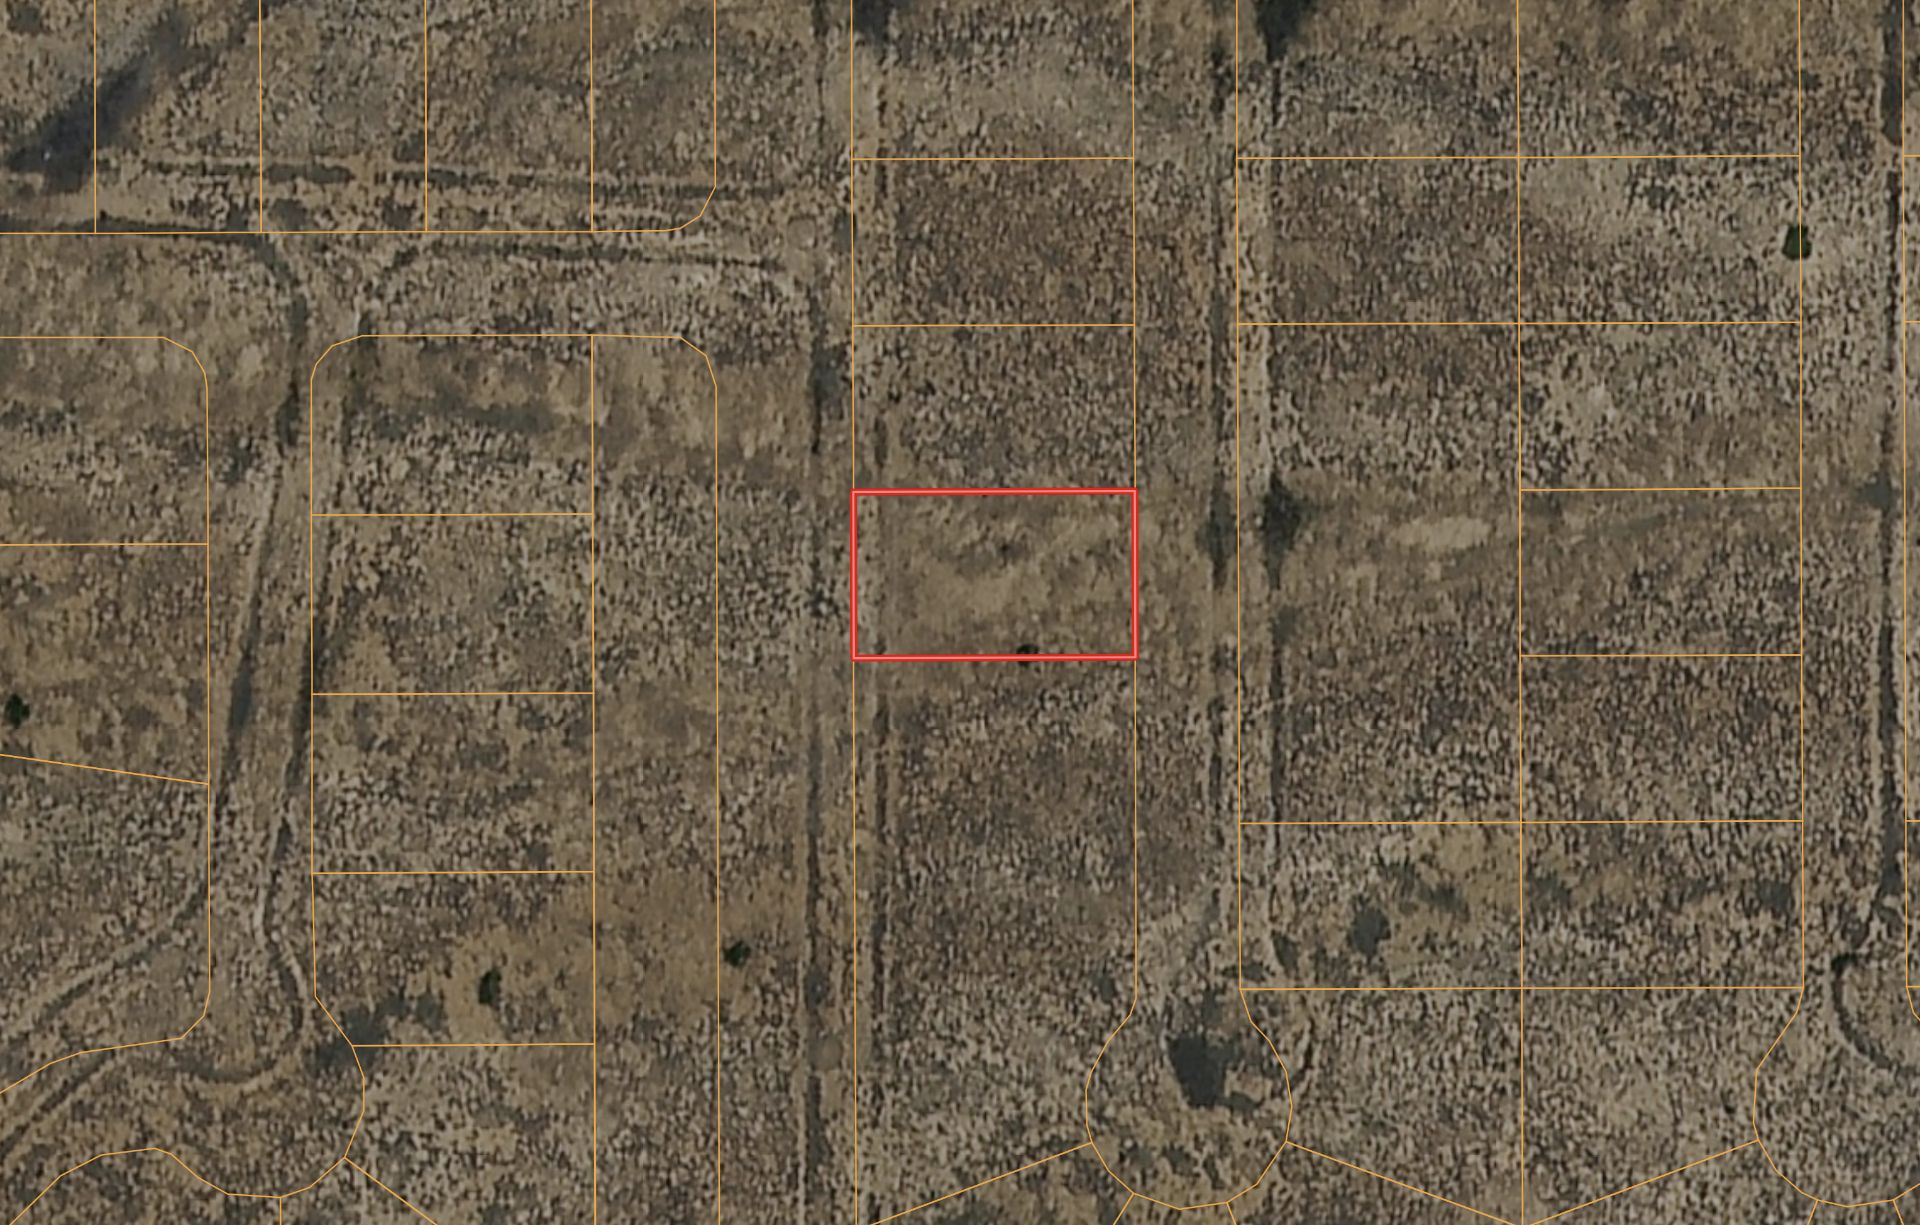 Exciting Developments Unfold in New Mexico - Secure Your Land Today! - Image 6 of 18